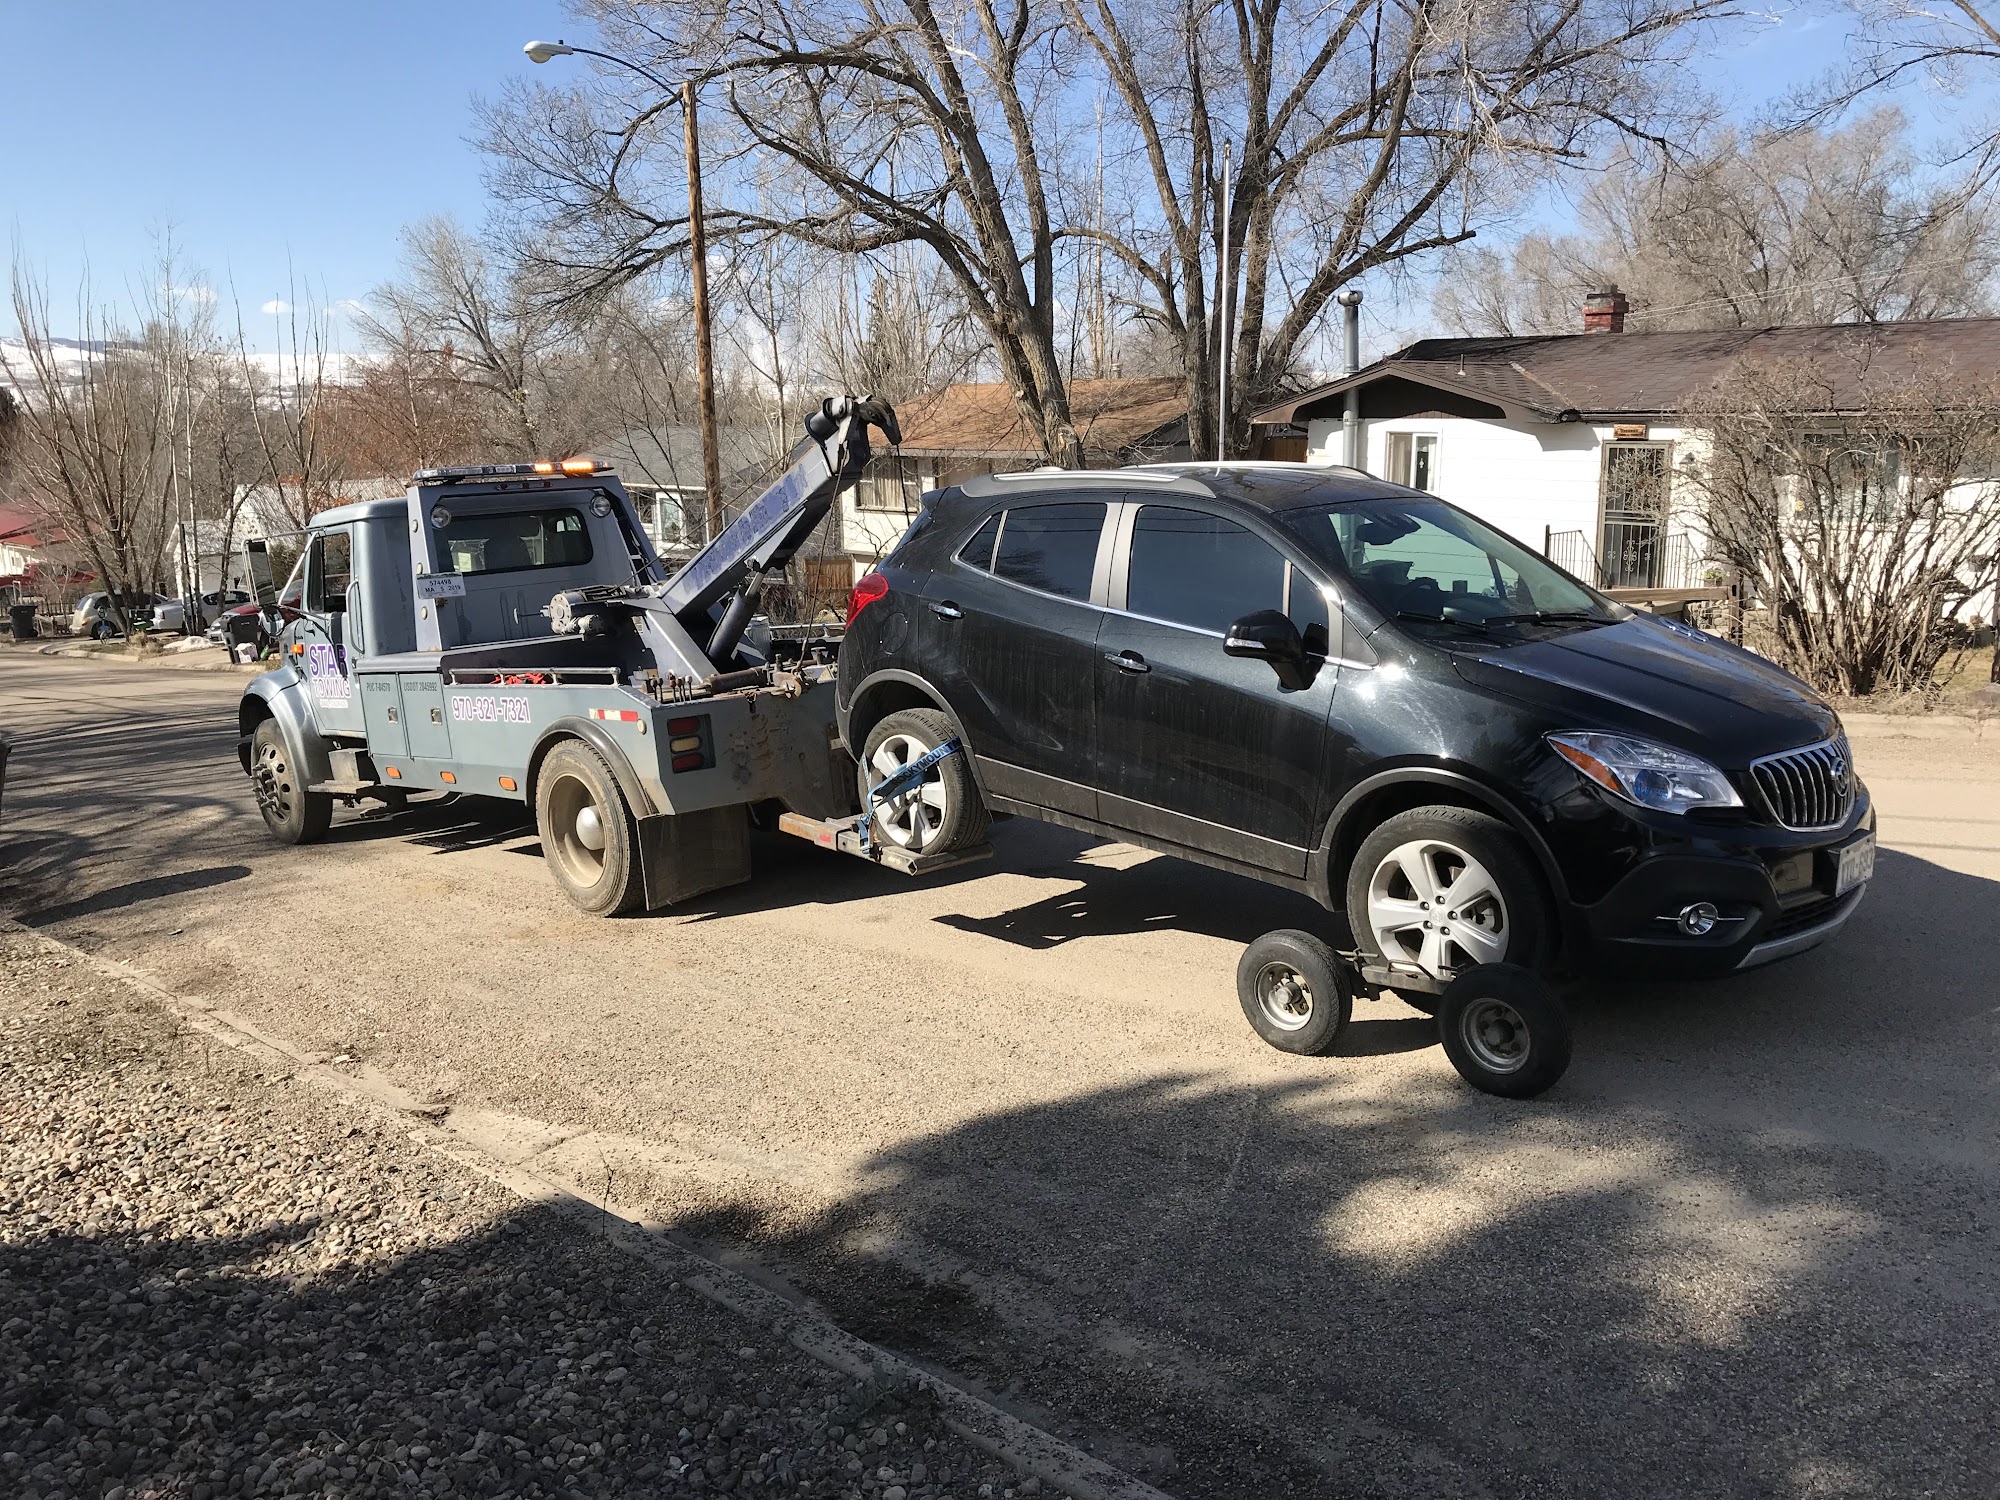 Star Towing And Recovery 1481 Yampa Ave, Craig Colorado 81625